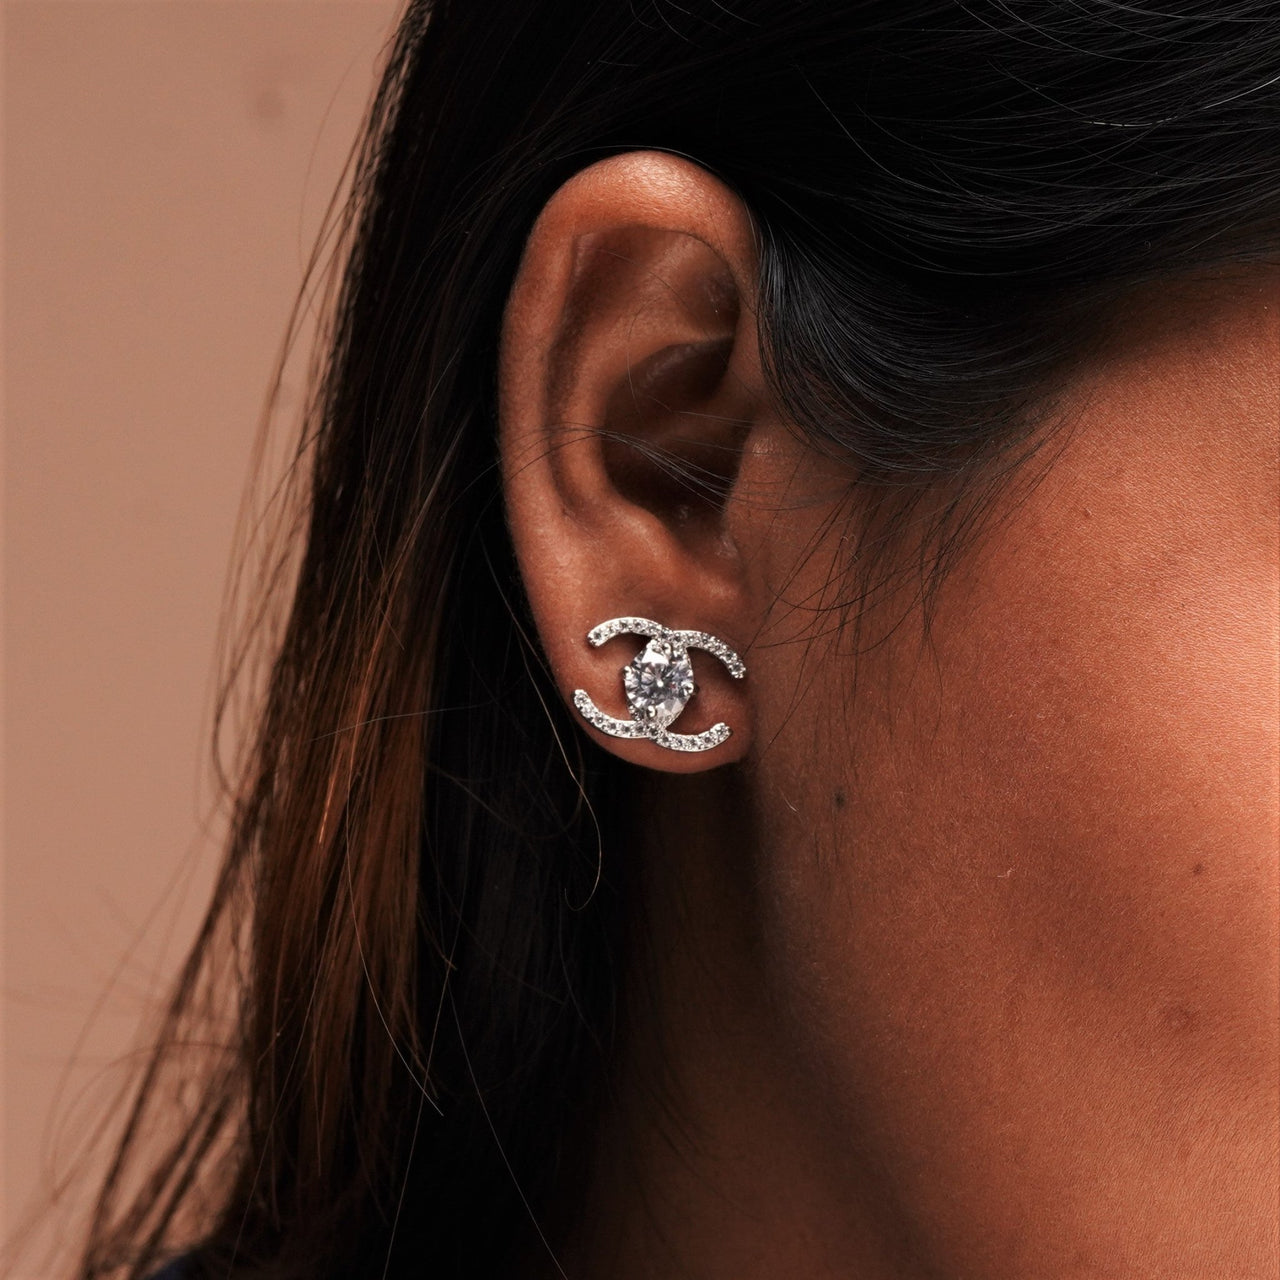 A silver color Earring on a girl's ear